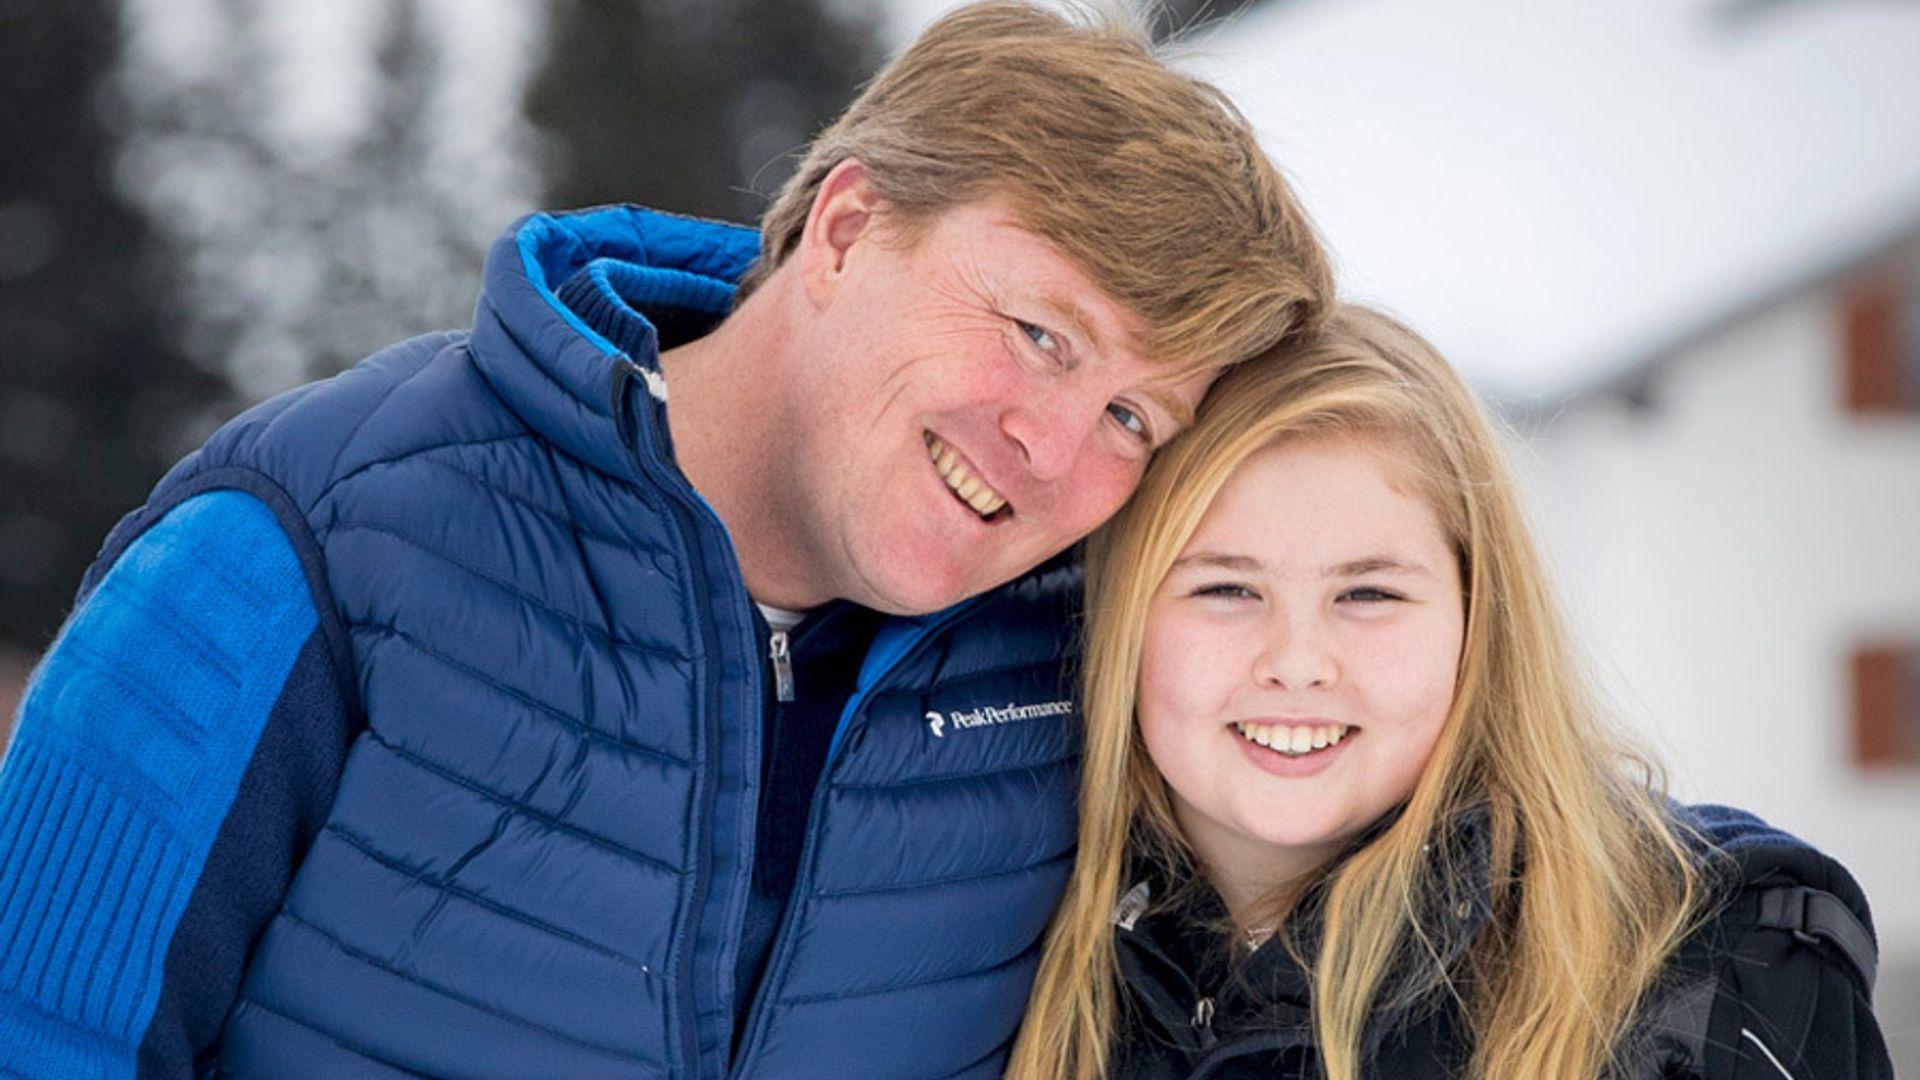 King Willem-Alexander wants his daughter Princess Amalia to experience life before taking the throne